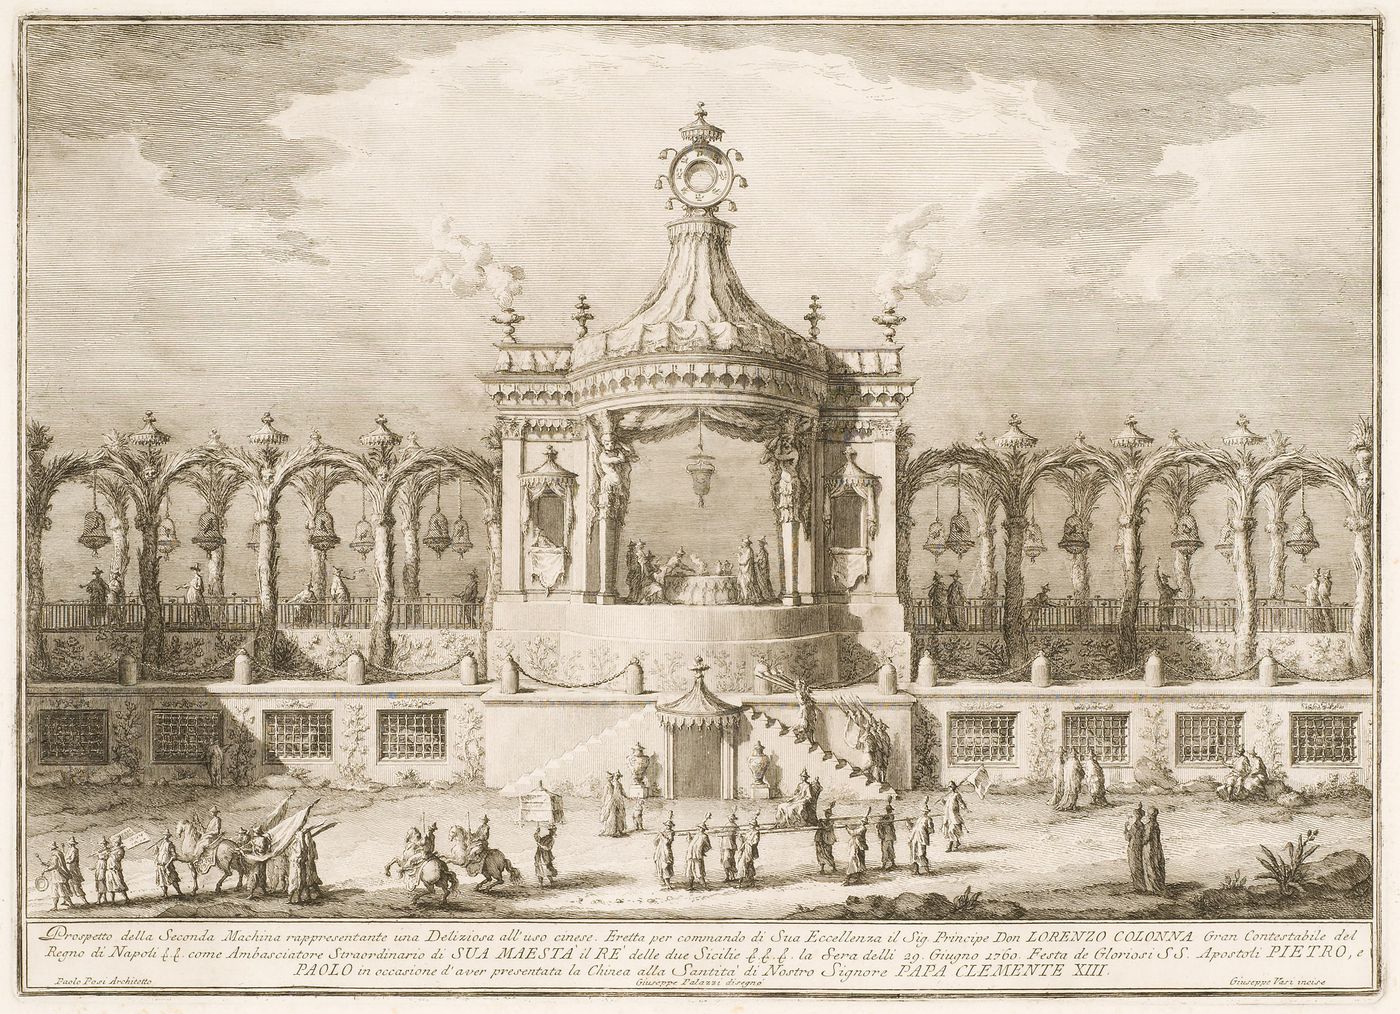 Etching of Posi's design for the "seconda macchina" of 1760